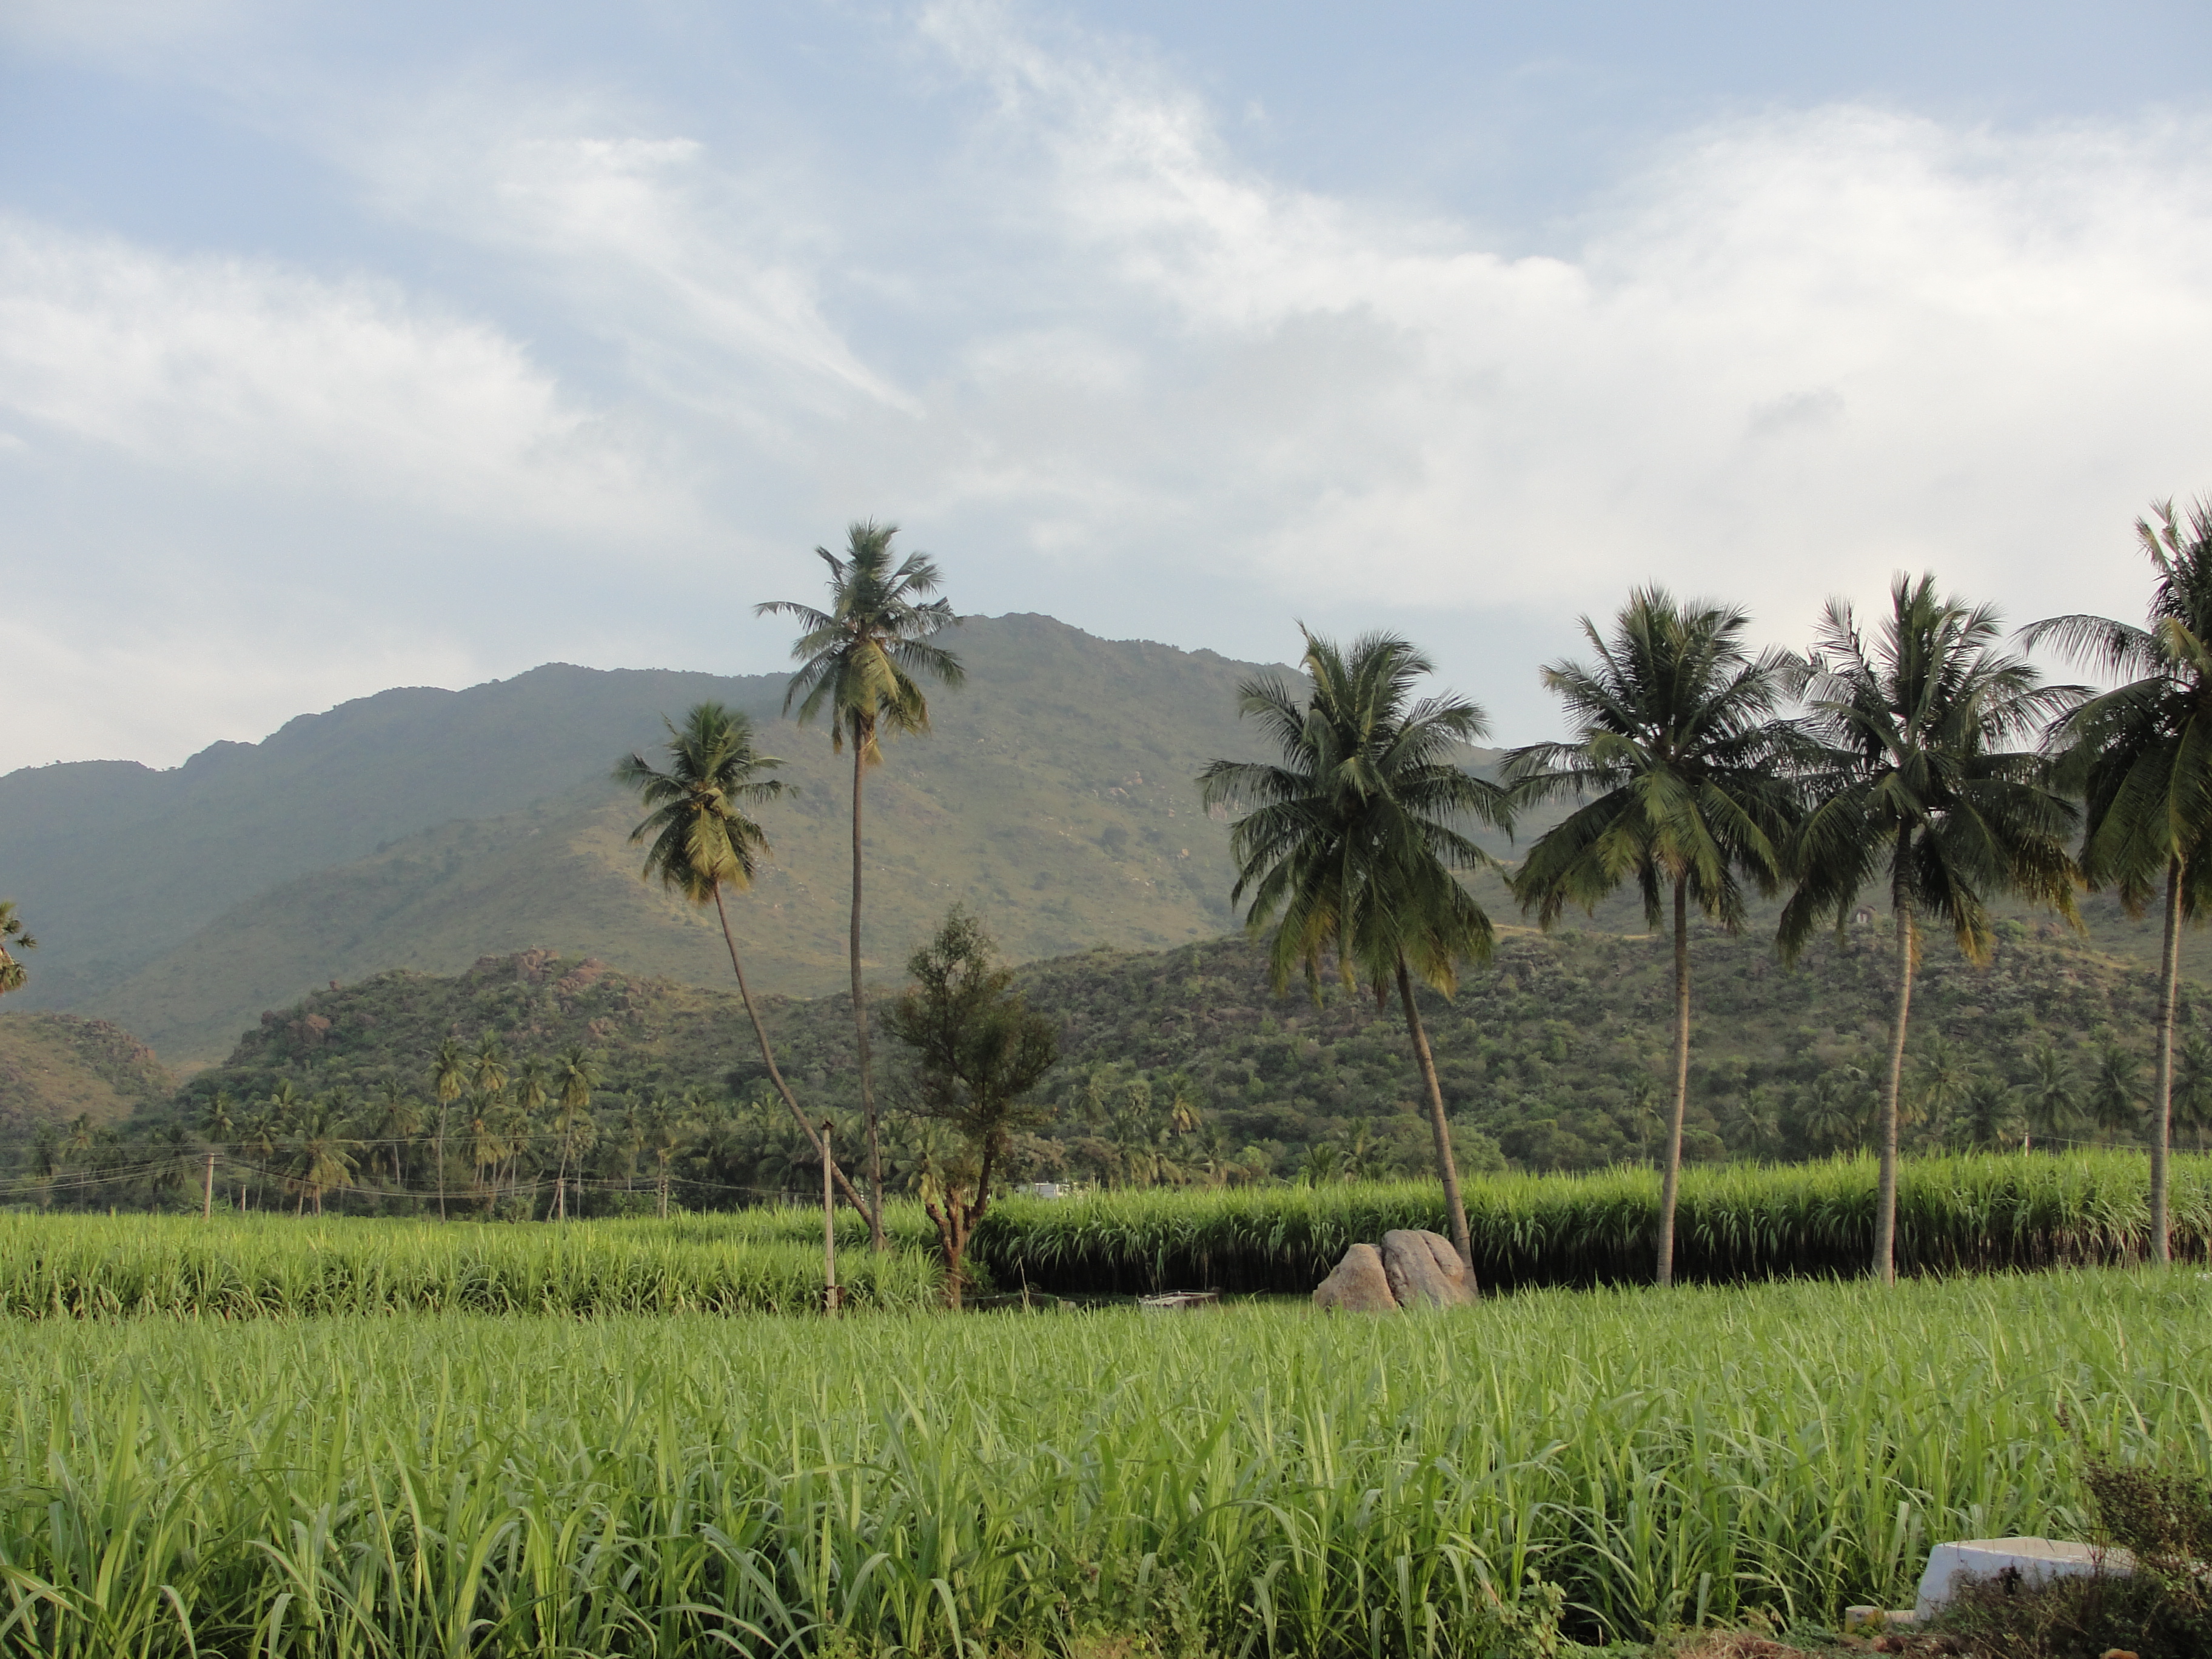 Land for sale in Vetturnimadam, Nagercoil